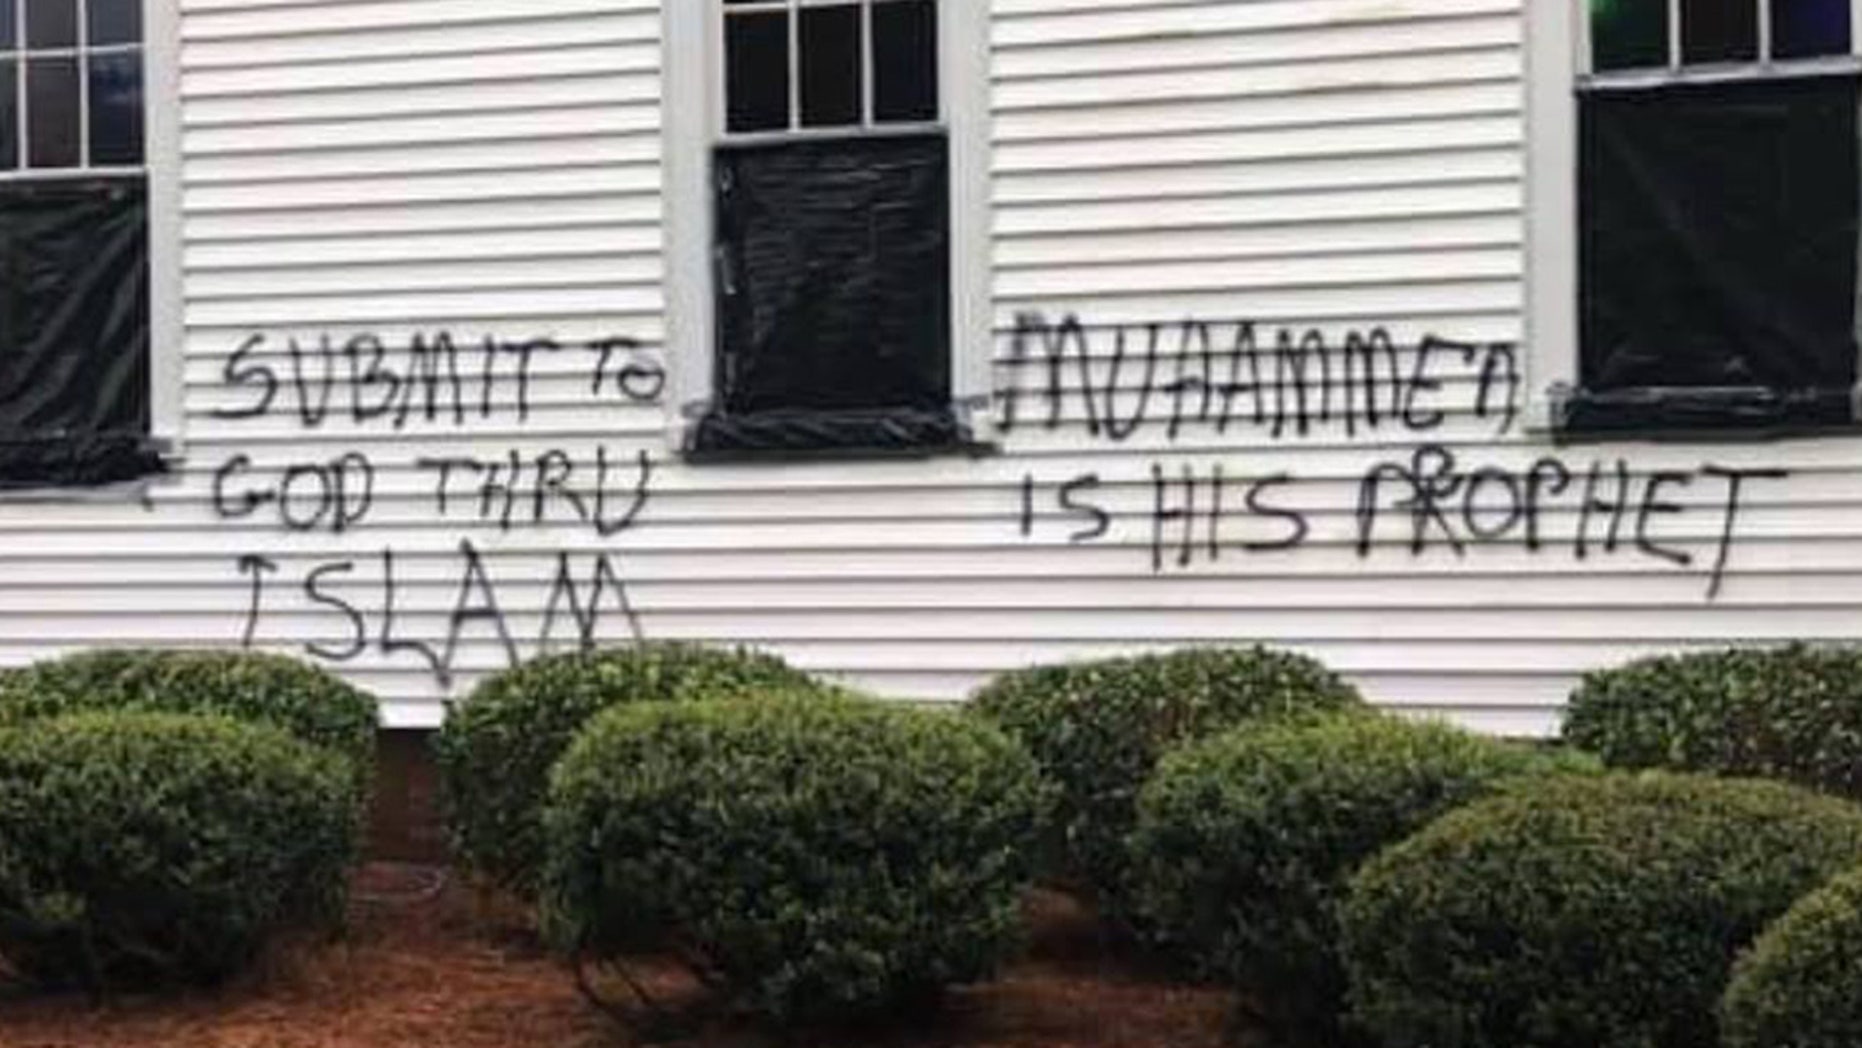 A Presbyterian church in upstate South Carolina was broken into and vandalized Sunday, according to the local police.